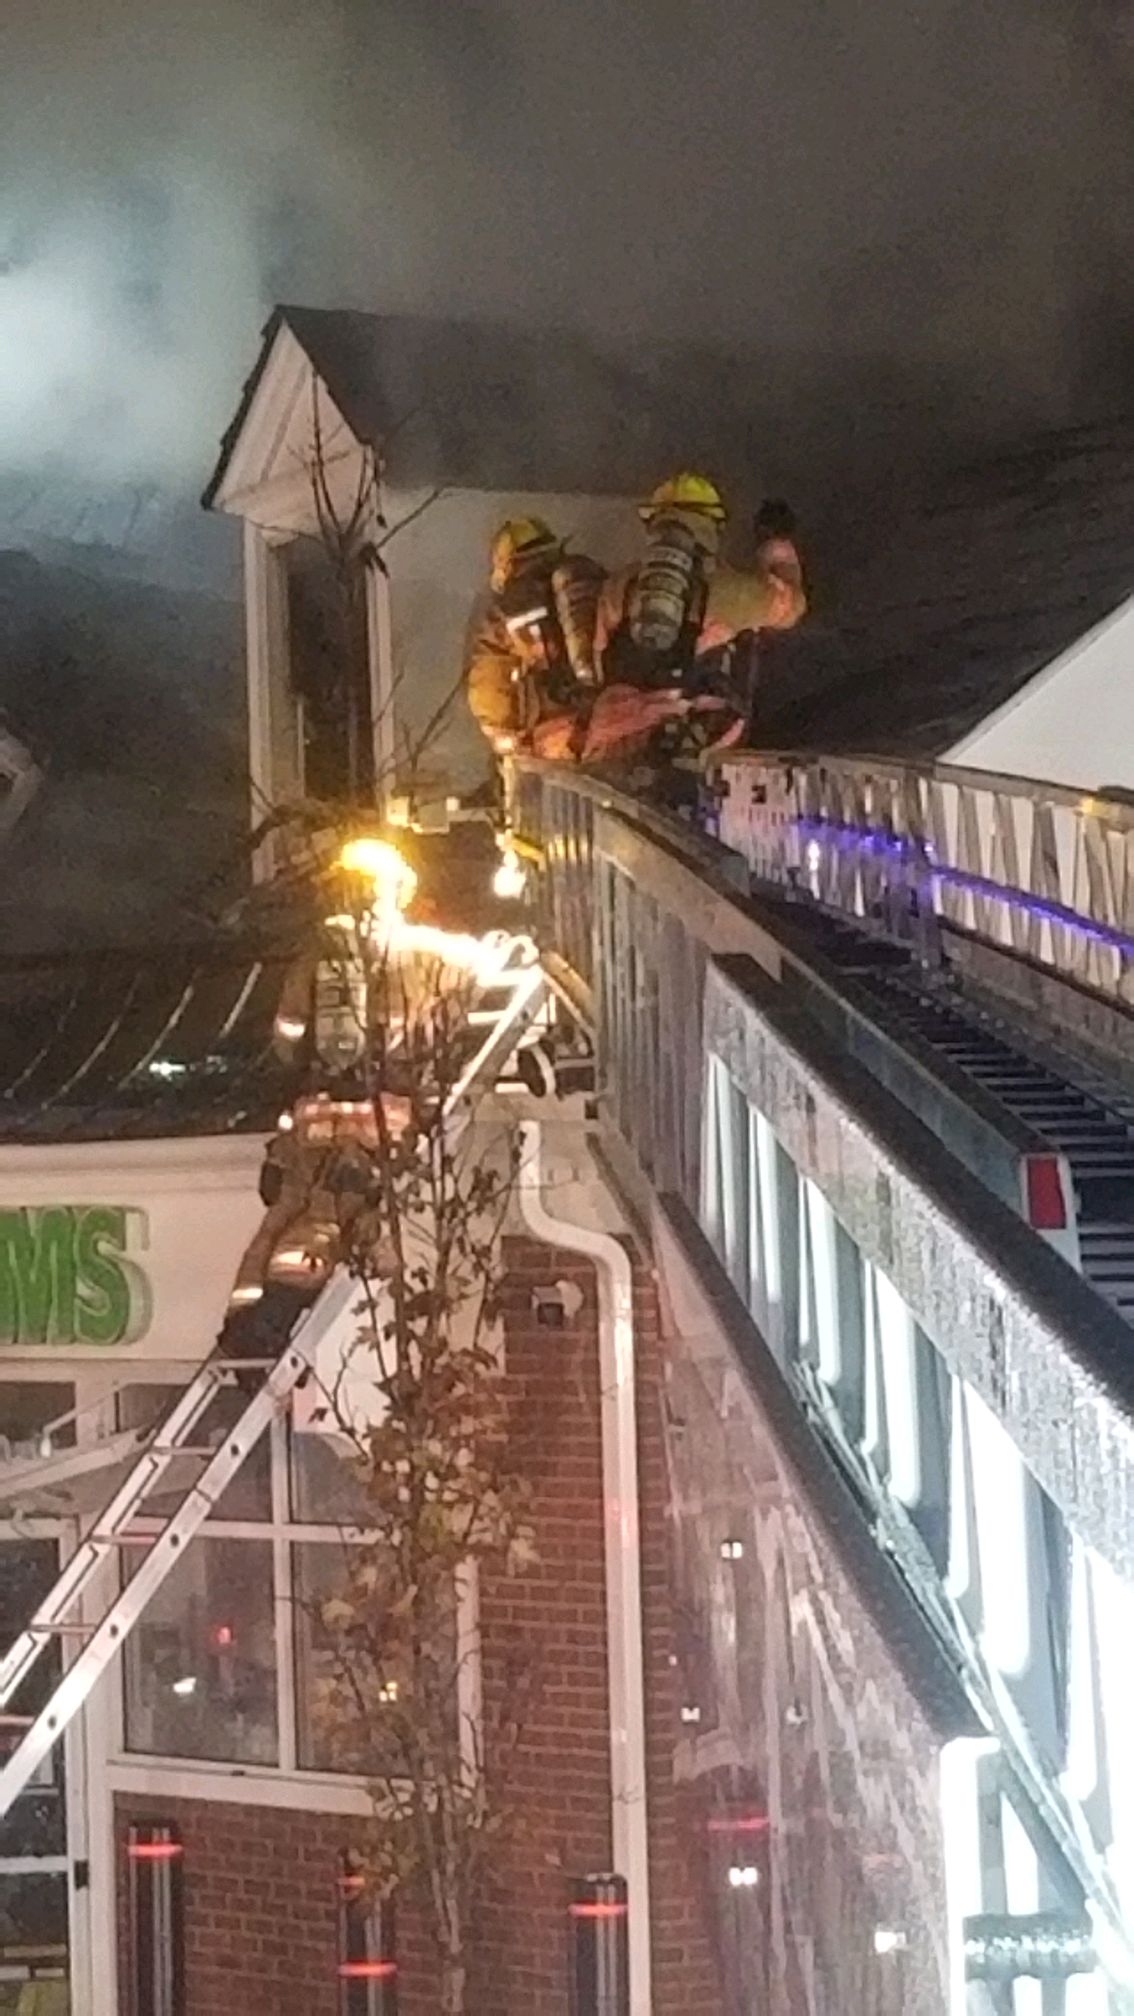 Firefighters vent the roof